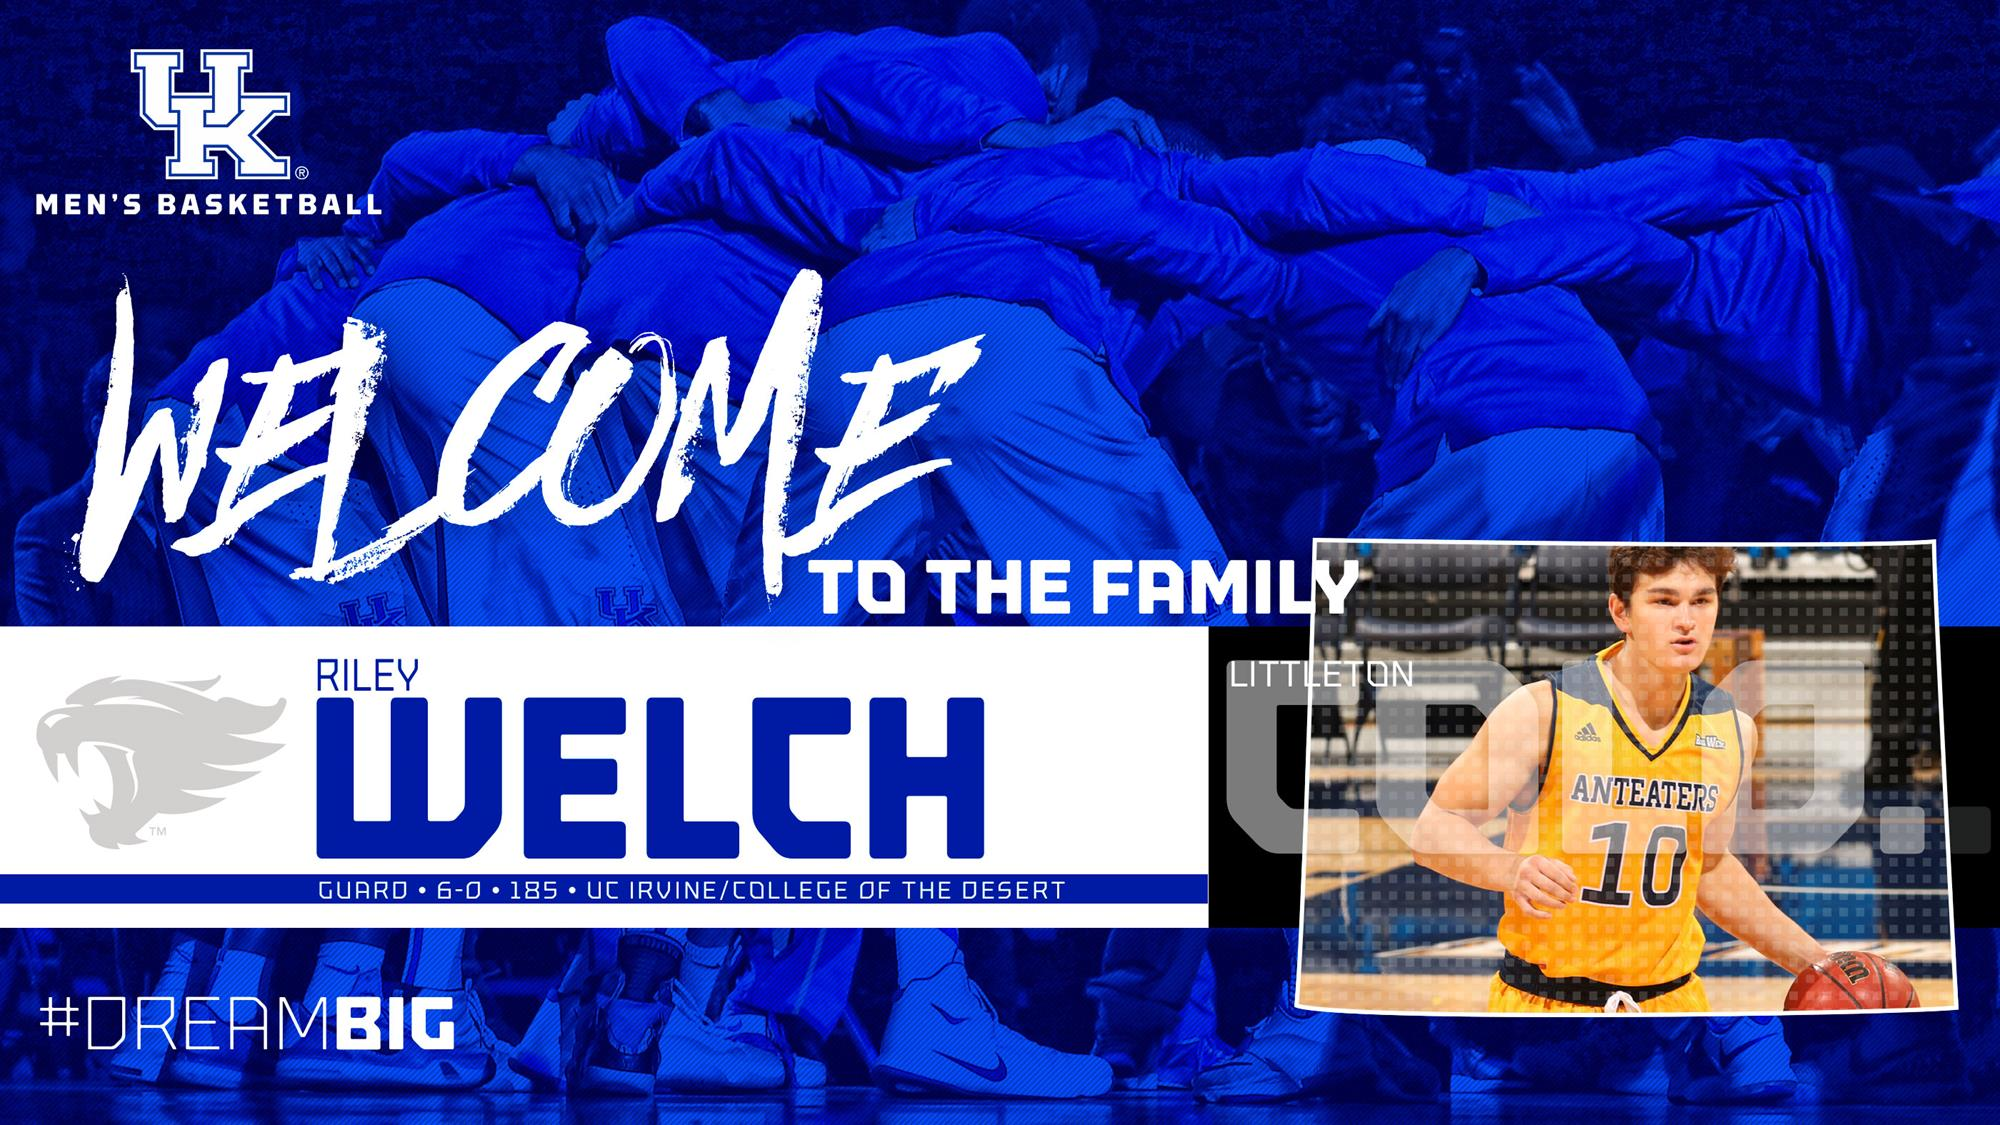 Kentucky Adds Riley Welch to 2019-20 Roster as Walk-On